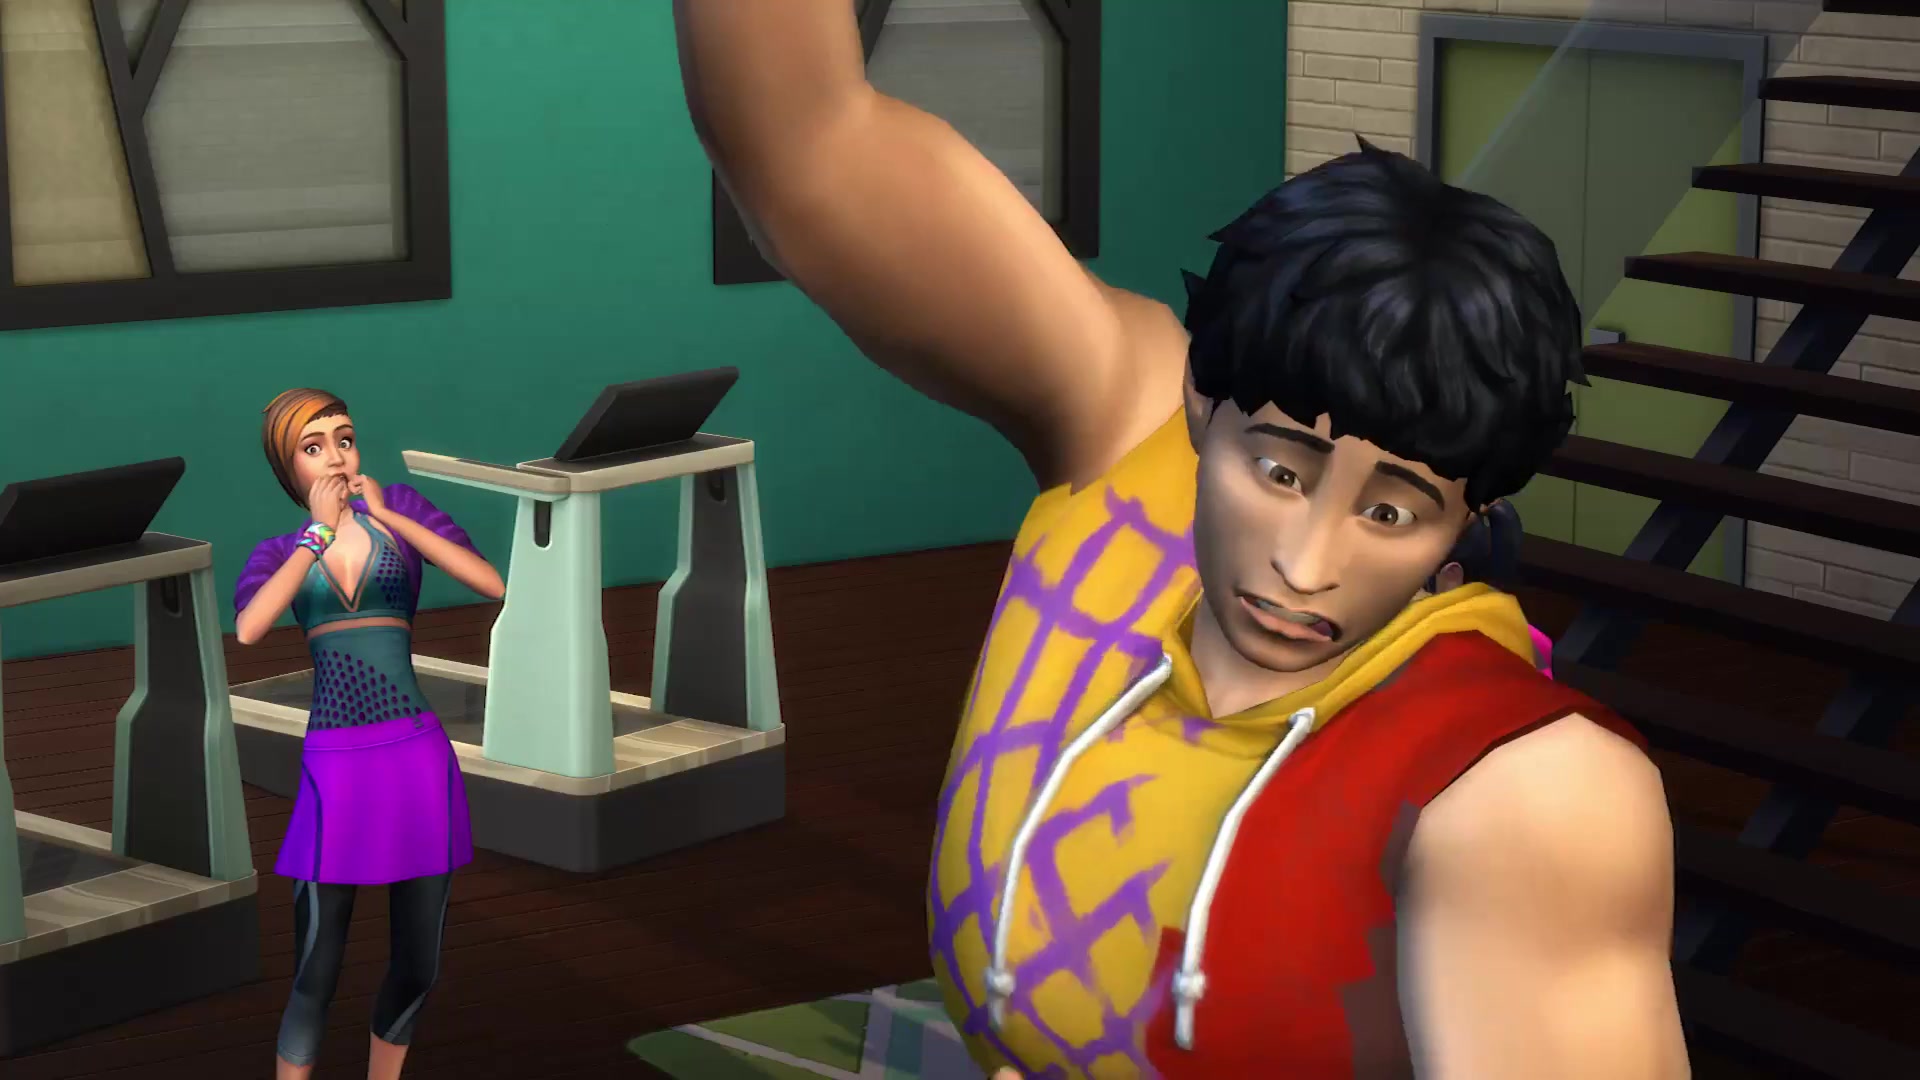 The Sims 4 Fitness Stuff: Official Product Info & Gameplay Features ...